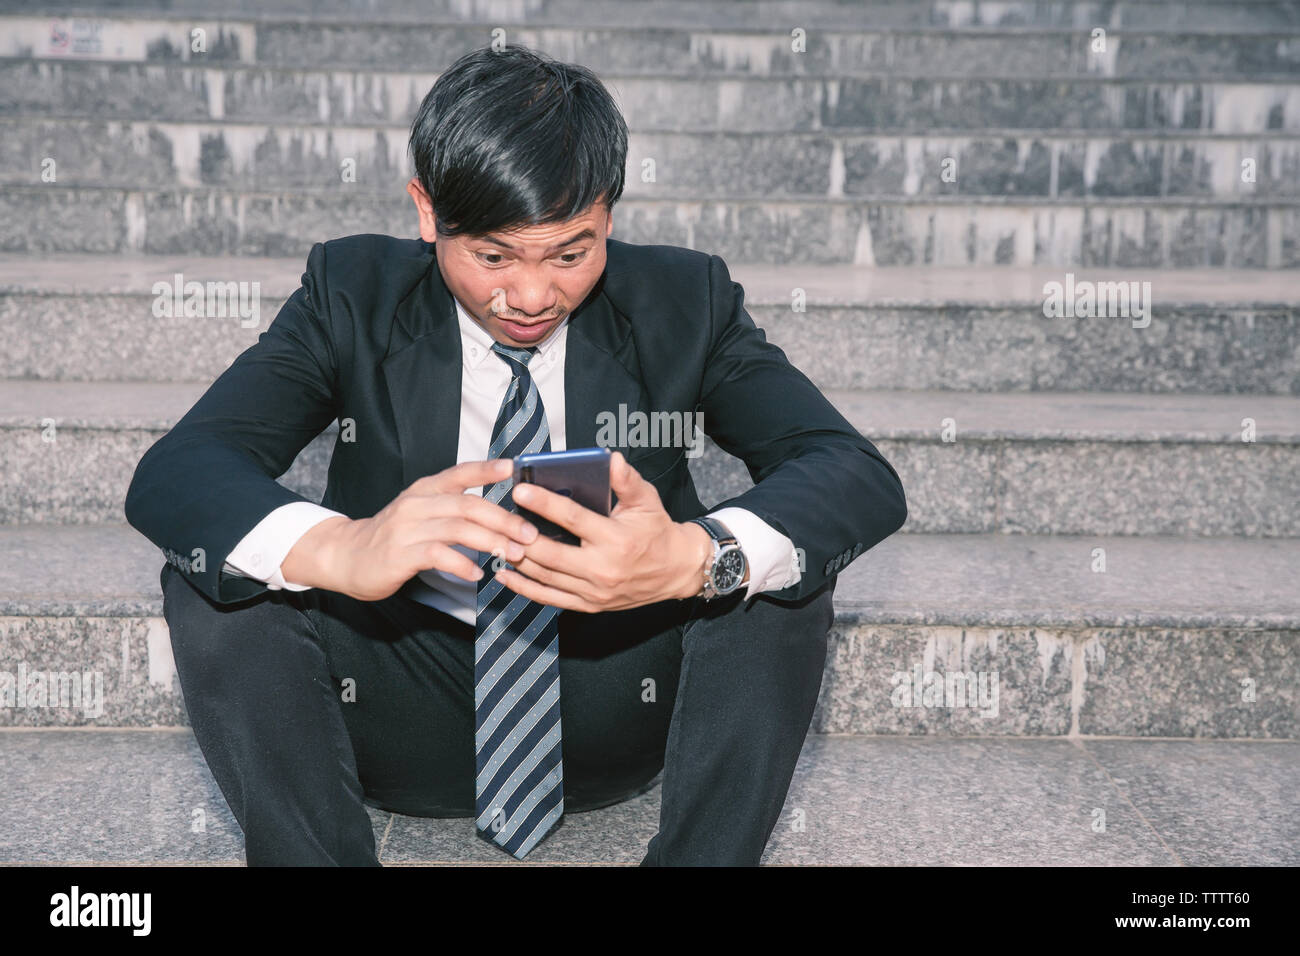 Asian businessmen with headaches or migraines at the city hall after work Images of young businessmen who are tired, stress, crisis, depression, failu Stock Photo